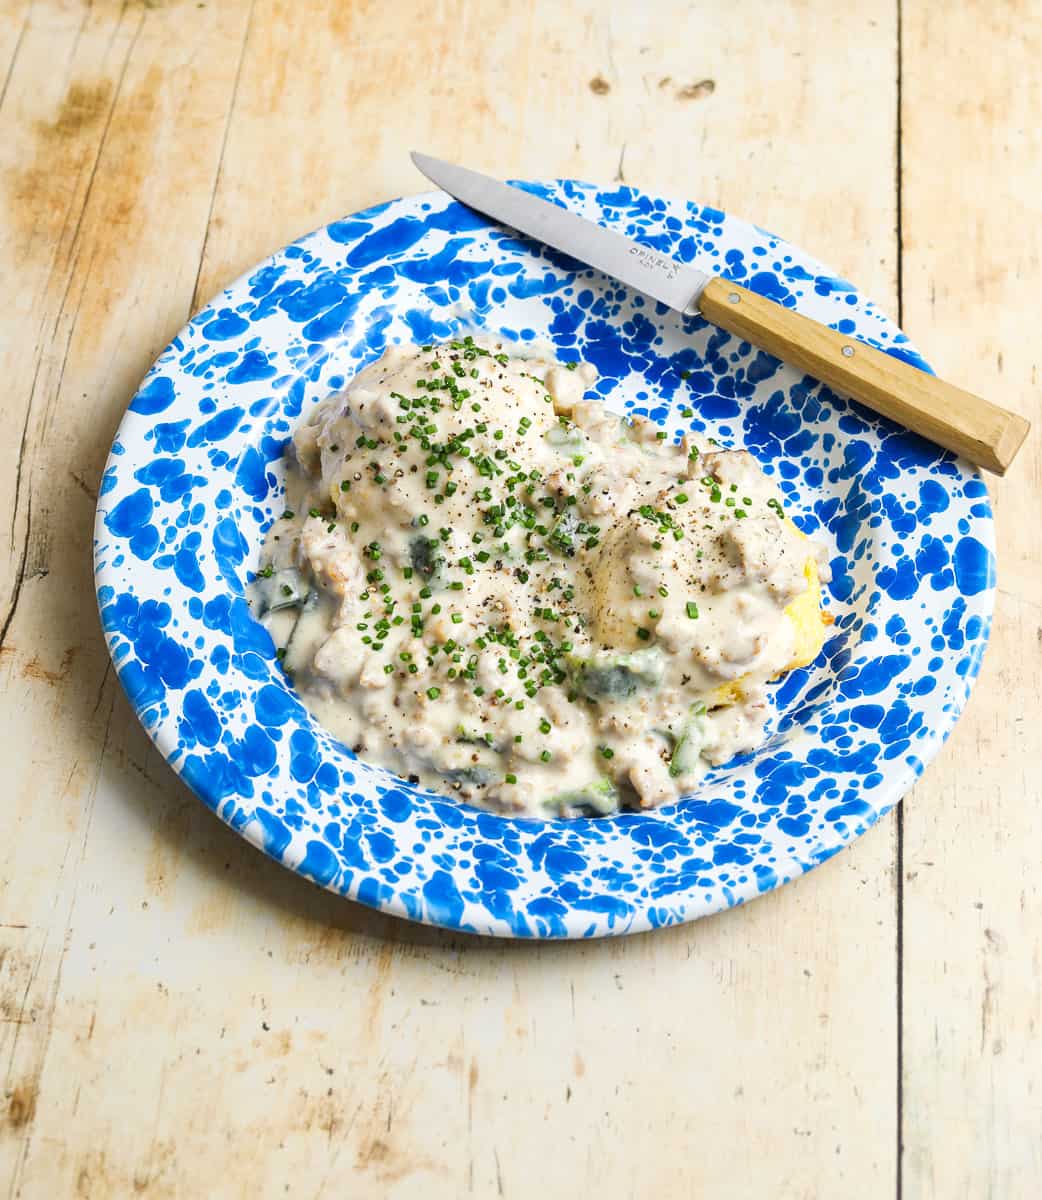 A blue and white enamel plate filled with biscuits and gravy topped with black pepper and minced chives.